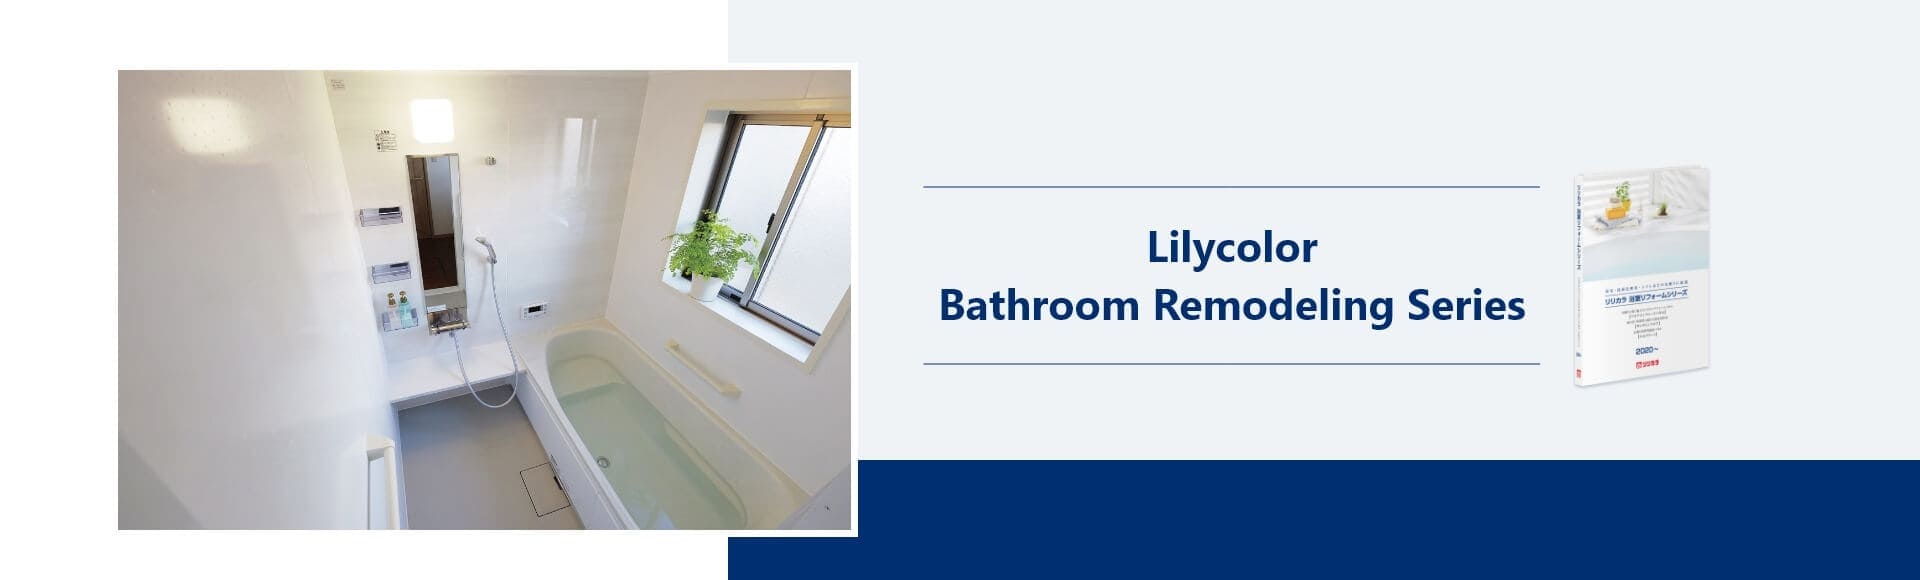 Lilycolor Bathroom Remodeling Series